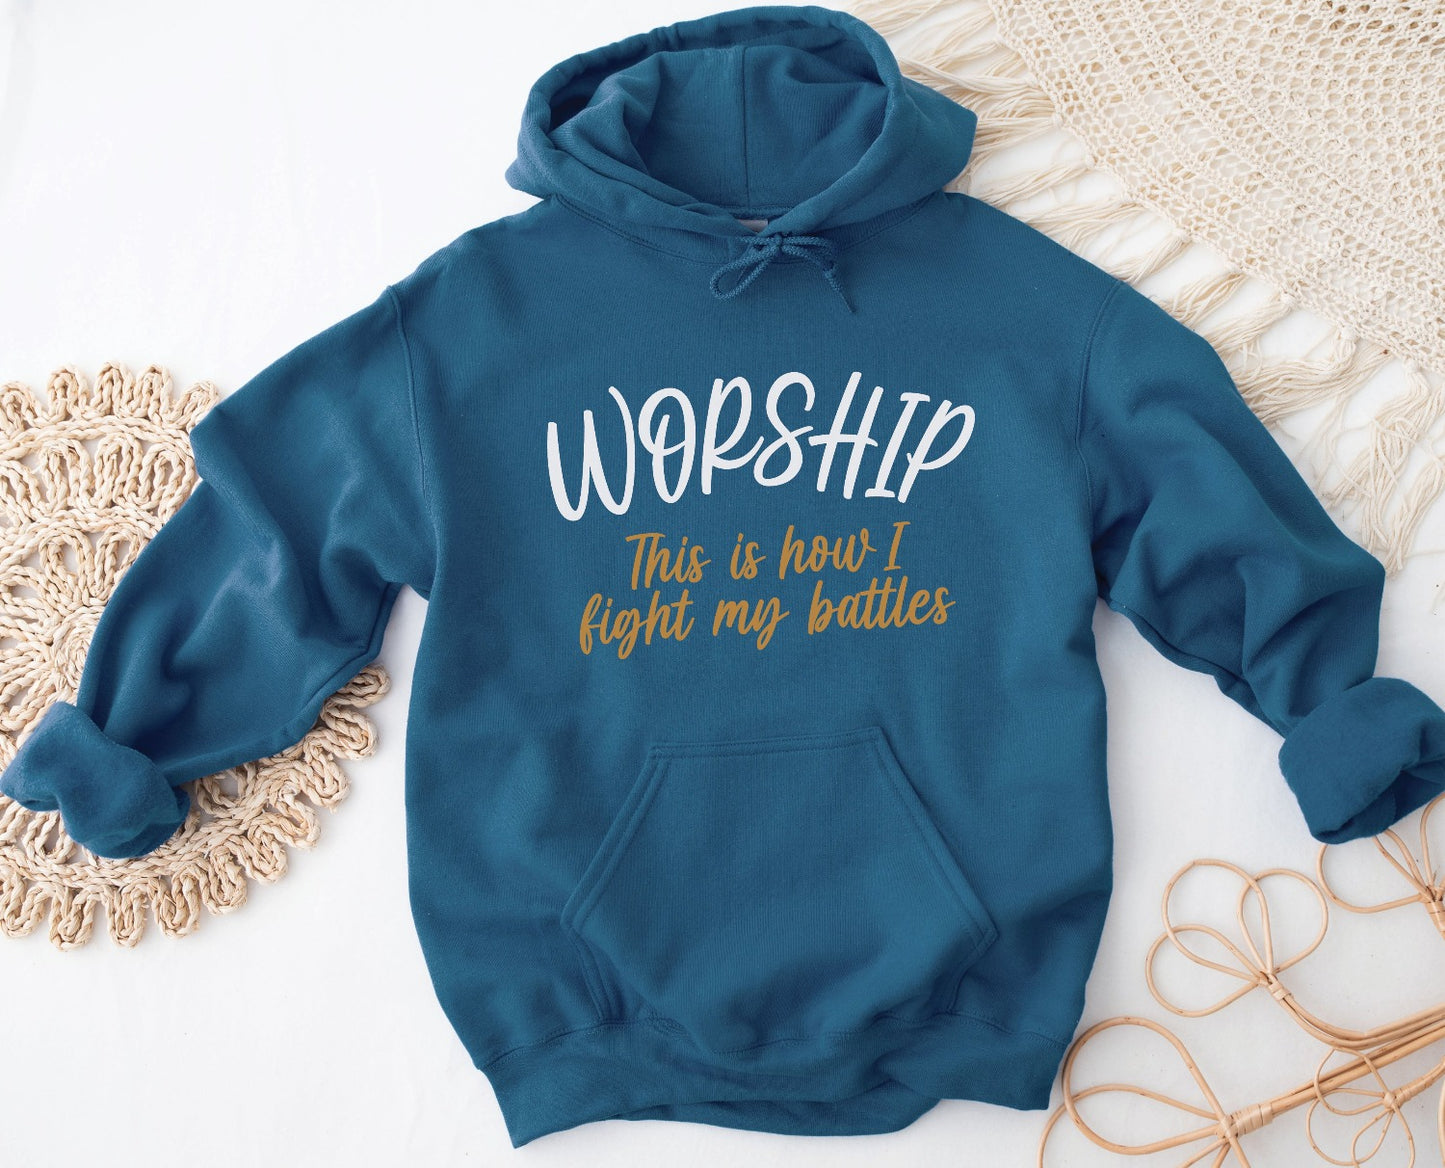 Worship This Is How I Fight My Battles Christian aesthetic design printed in white and gold on cozy indigo blue unisex hoodie for women and men, great gift for worship leaders